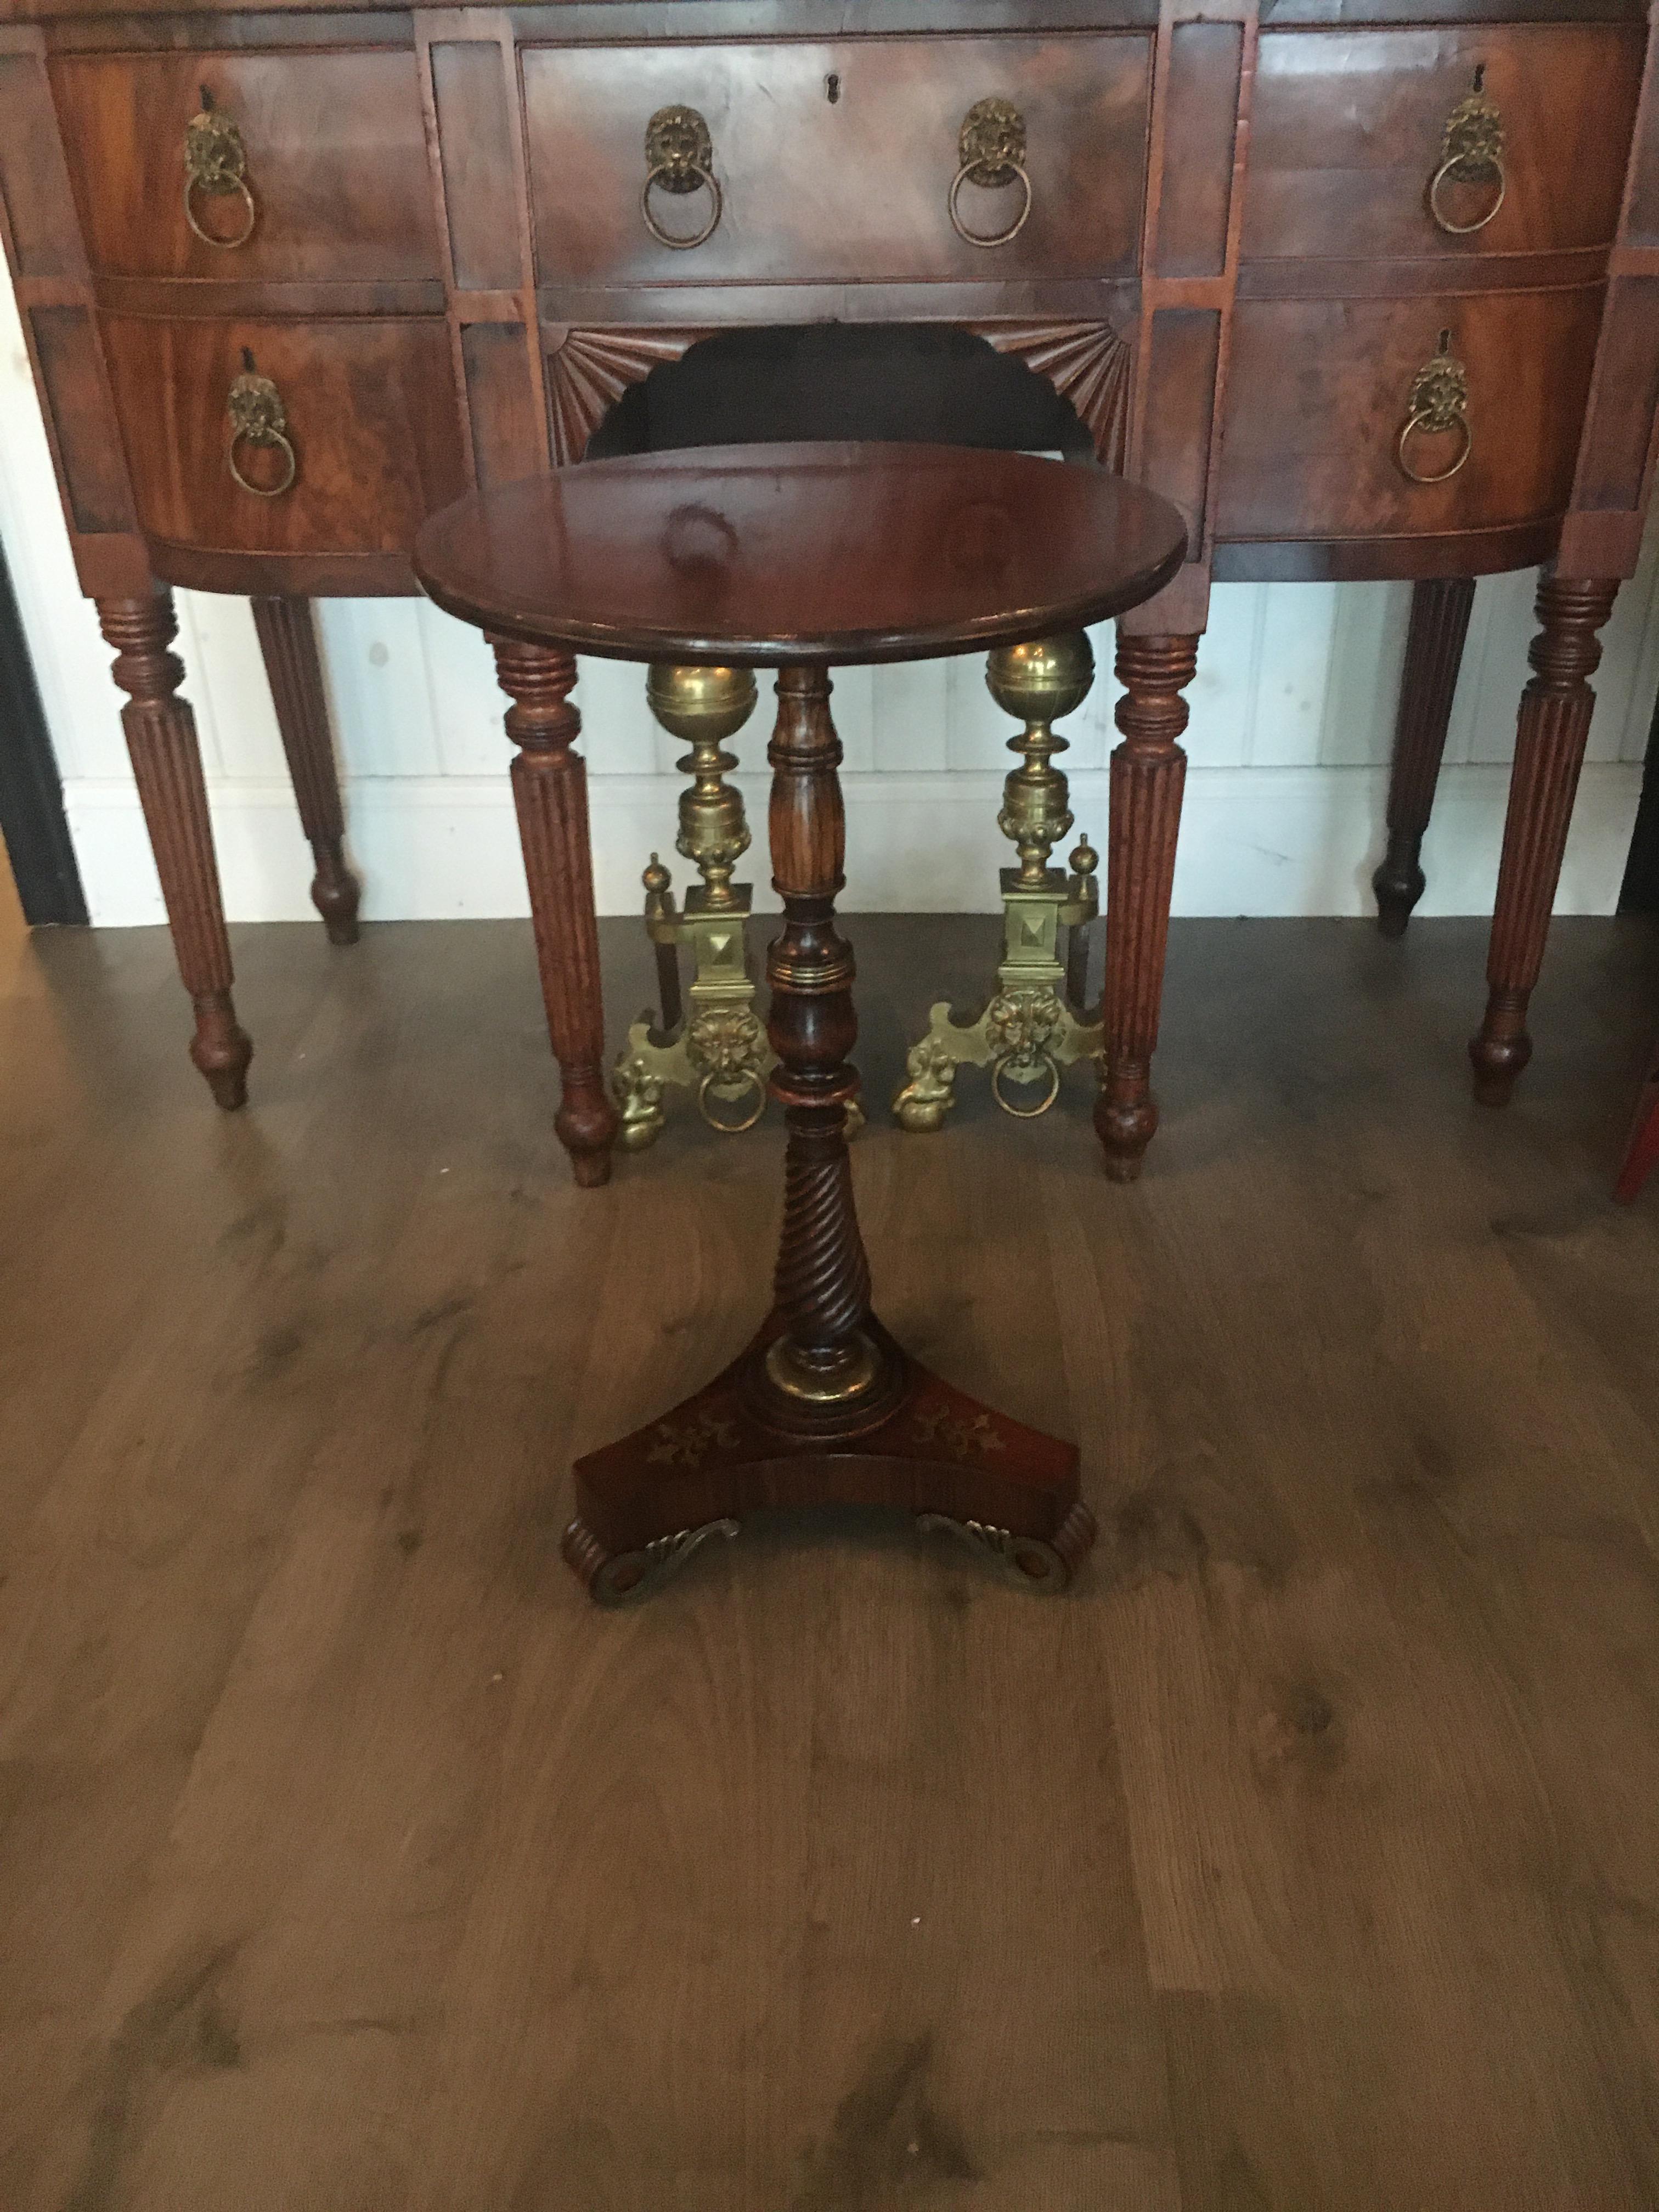 Early 19th century English regency rosewood side table with brass inlay and mount's. Great color and patination. Perfect drinks table.